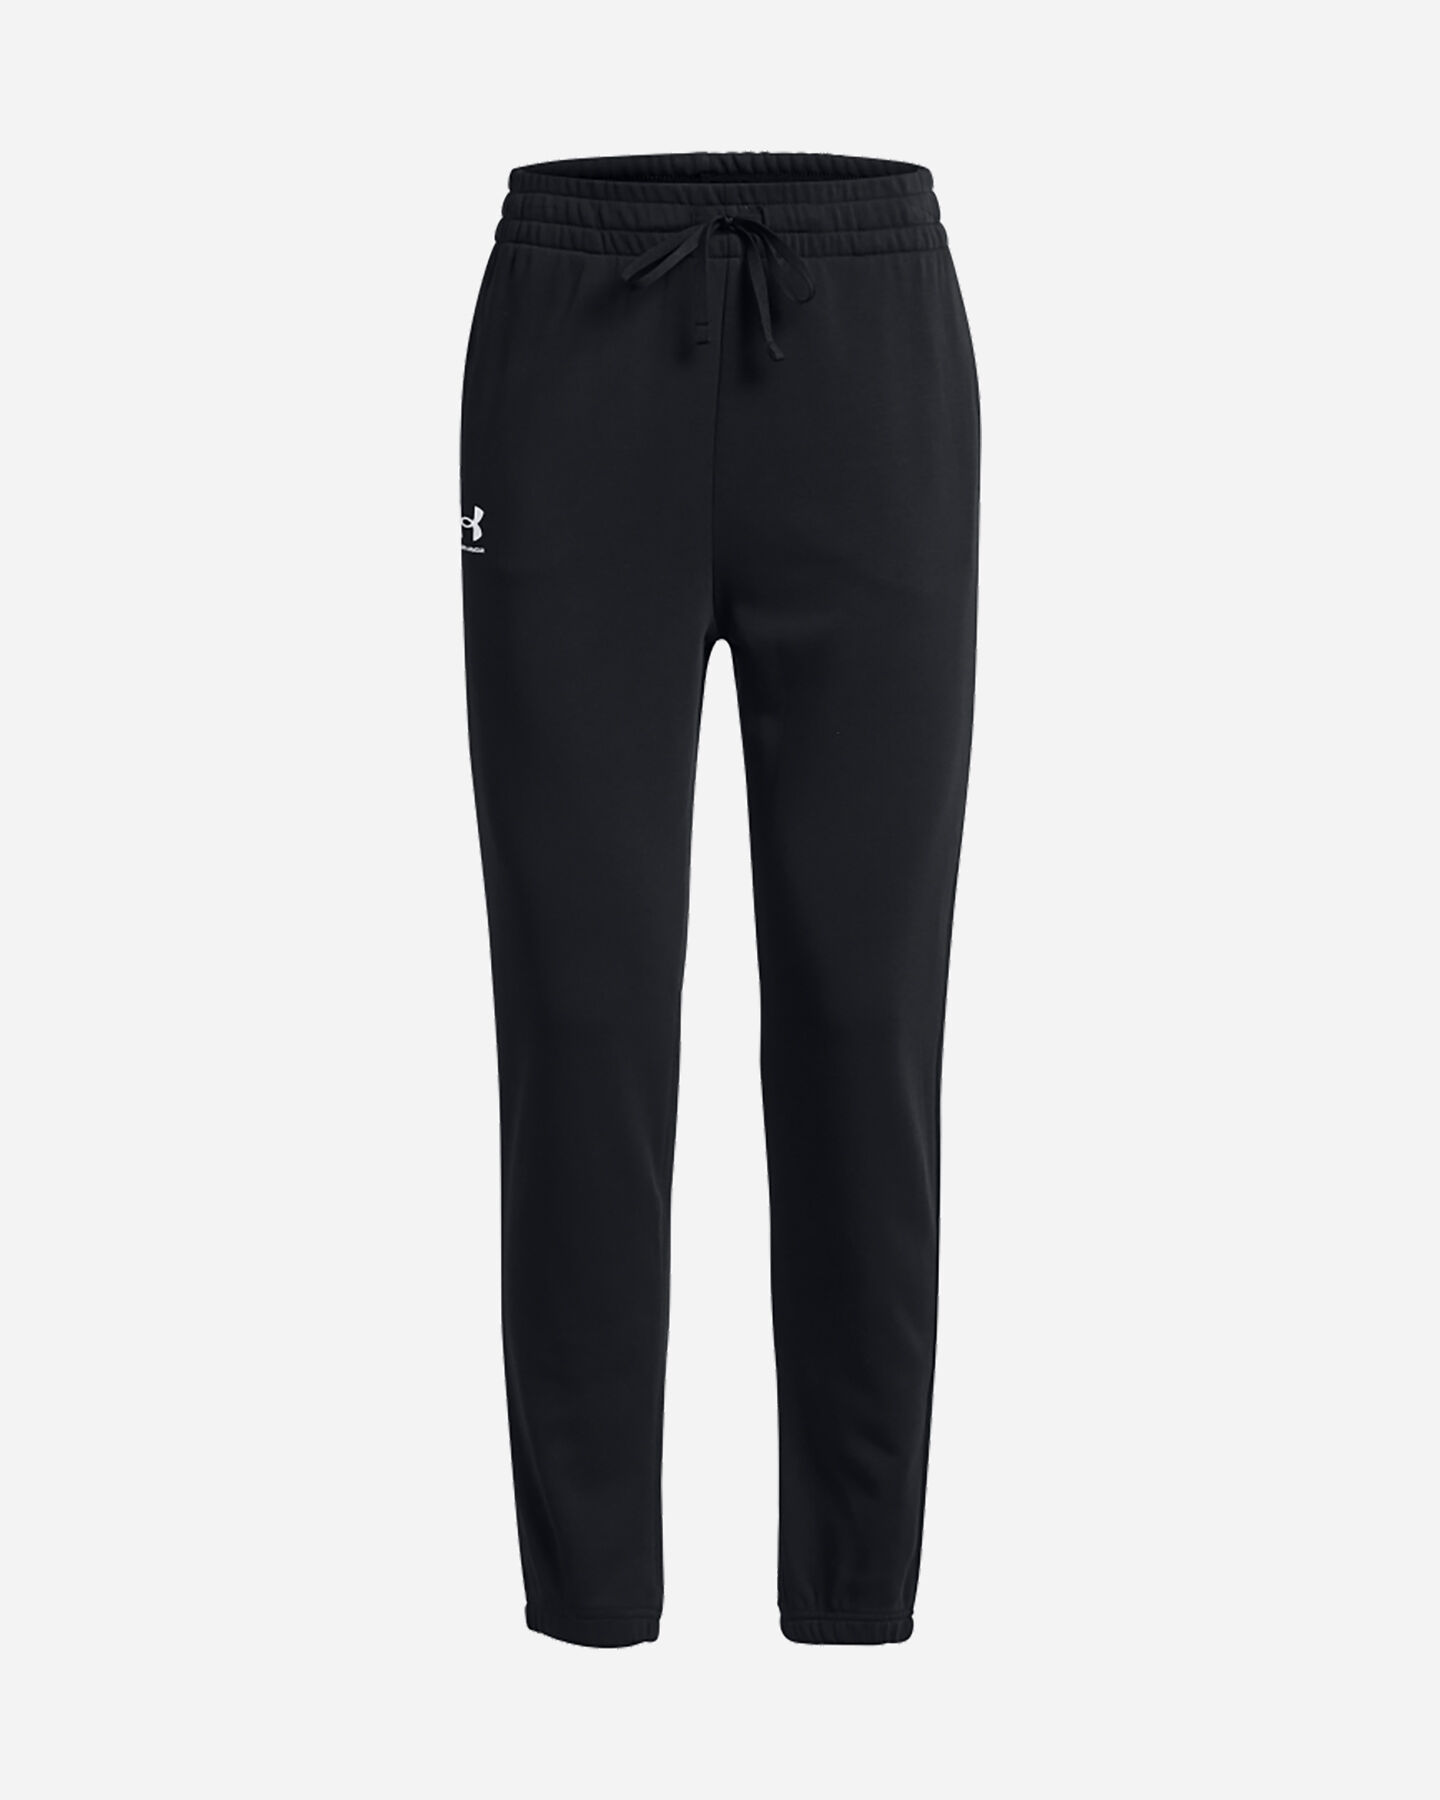  Pantalone UNDER ARMOUR RIVAL TERRY W S5641553|0001|XS scatto 0